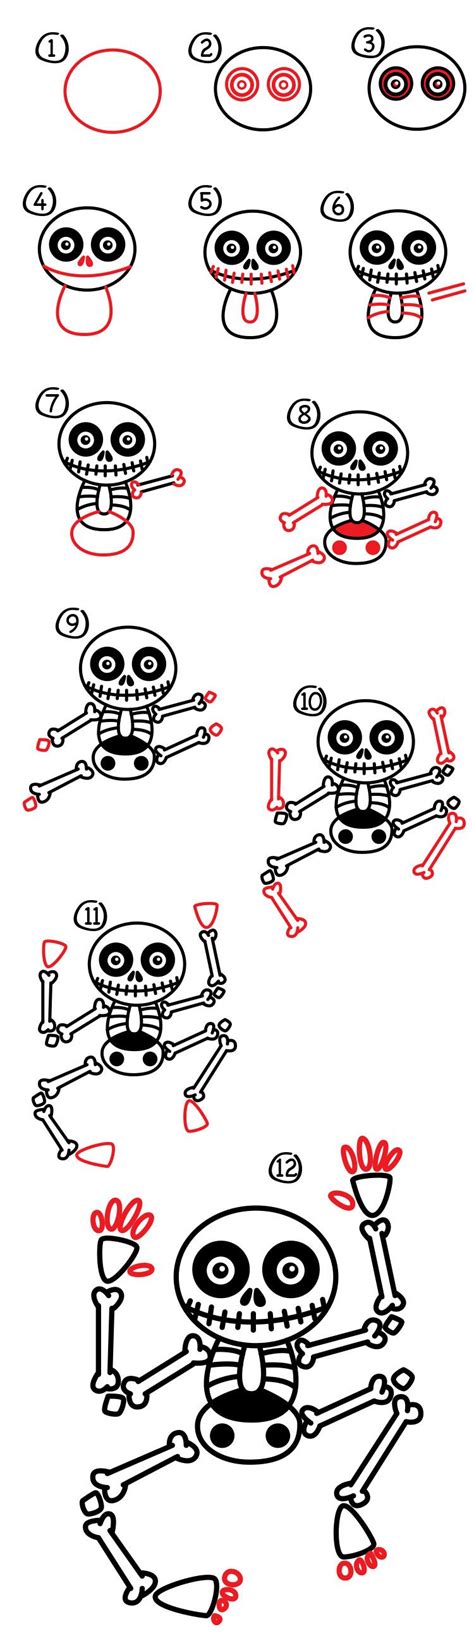 How To Draw A Skeleton Follow These Easy Step By Steps To Draw Your